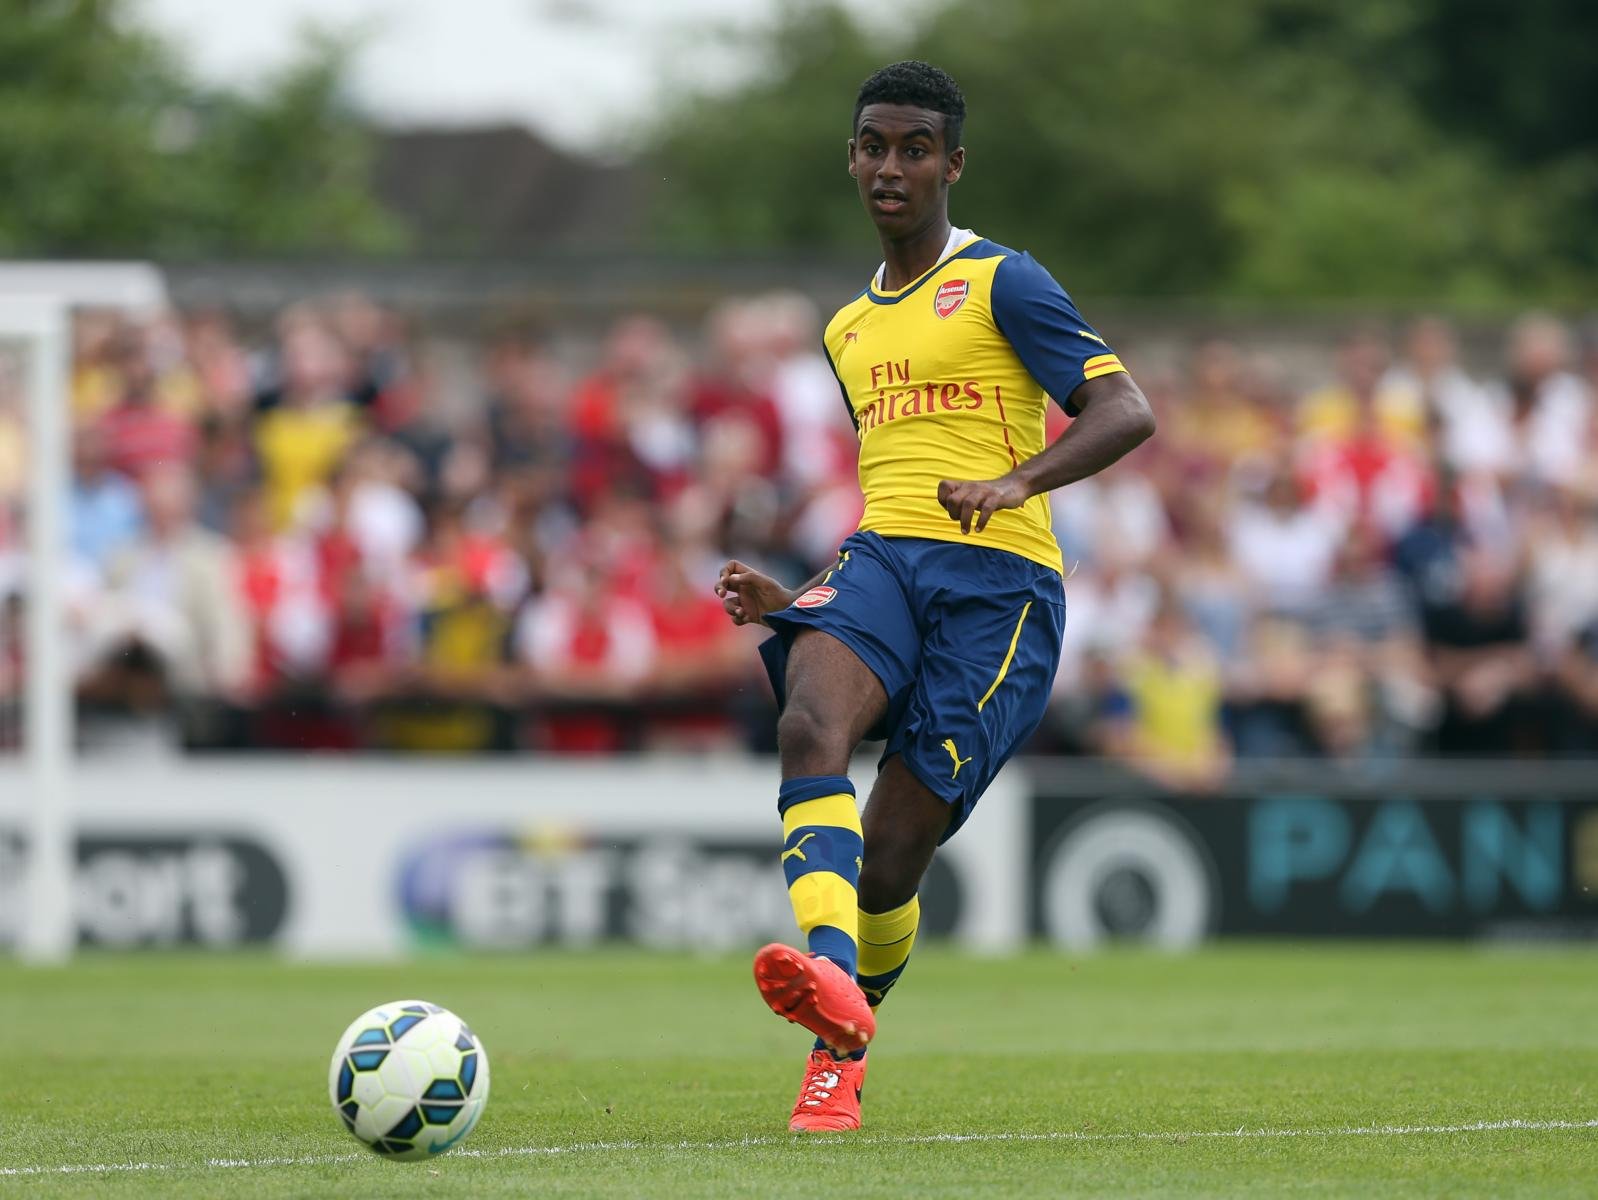 League One side consider loan move for Arsenal midfielder